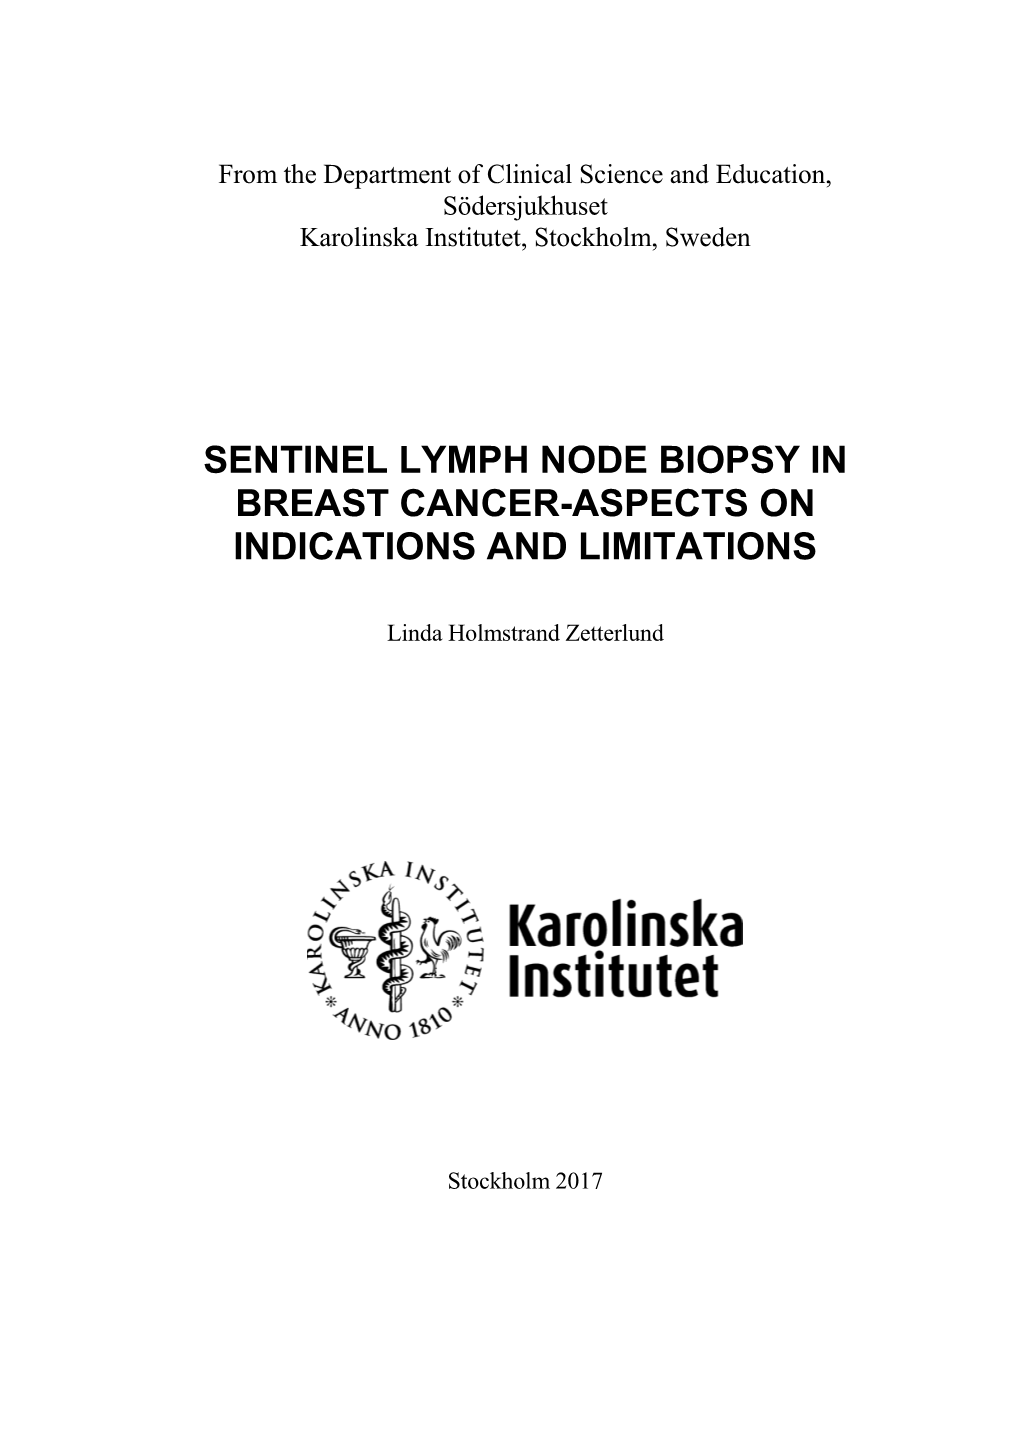 Sentinel Lymph Node Biopsy in Breast Cancer-Aspects on Indications and Limitations